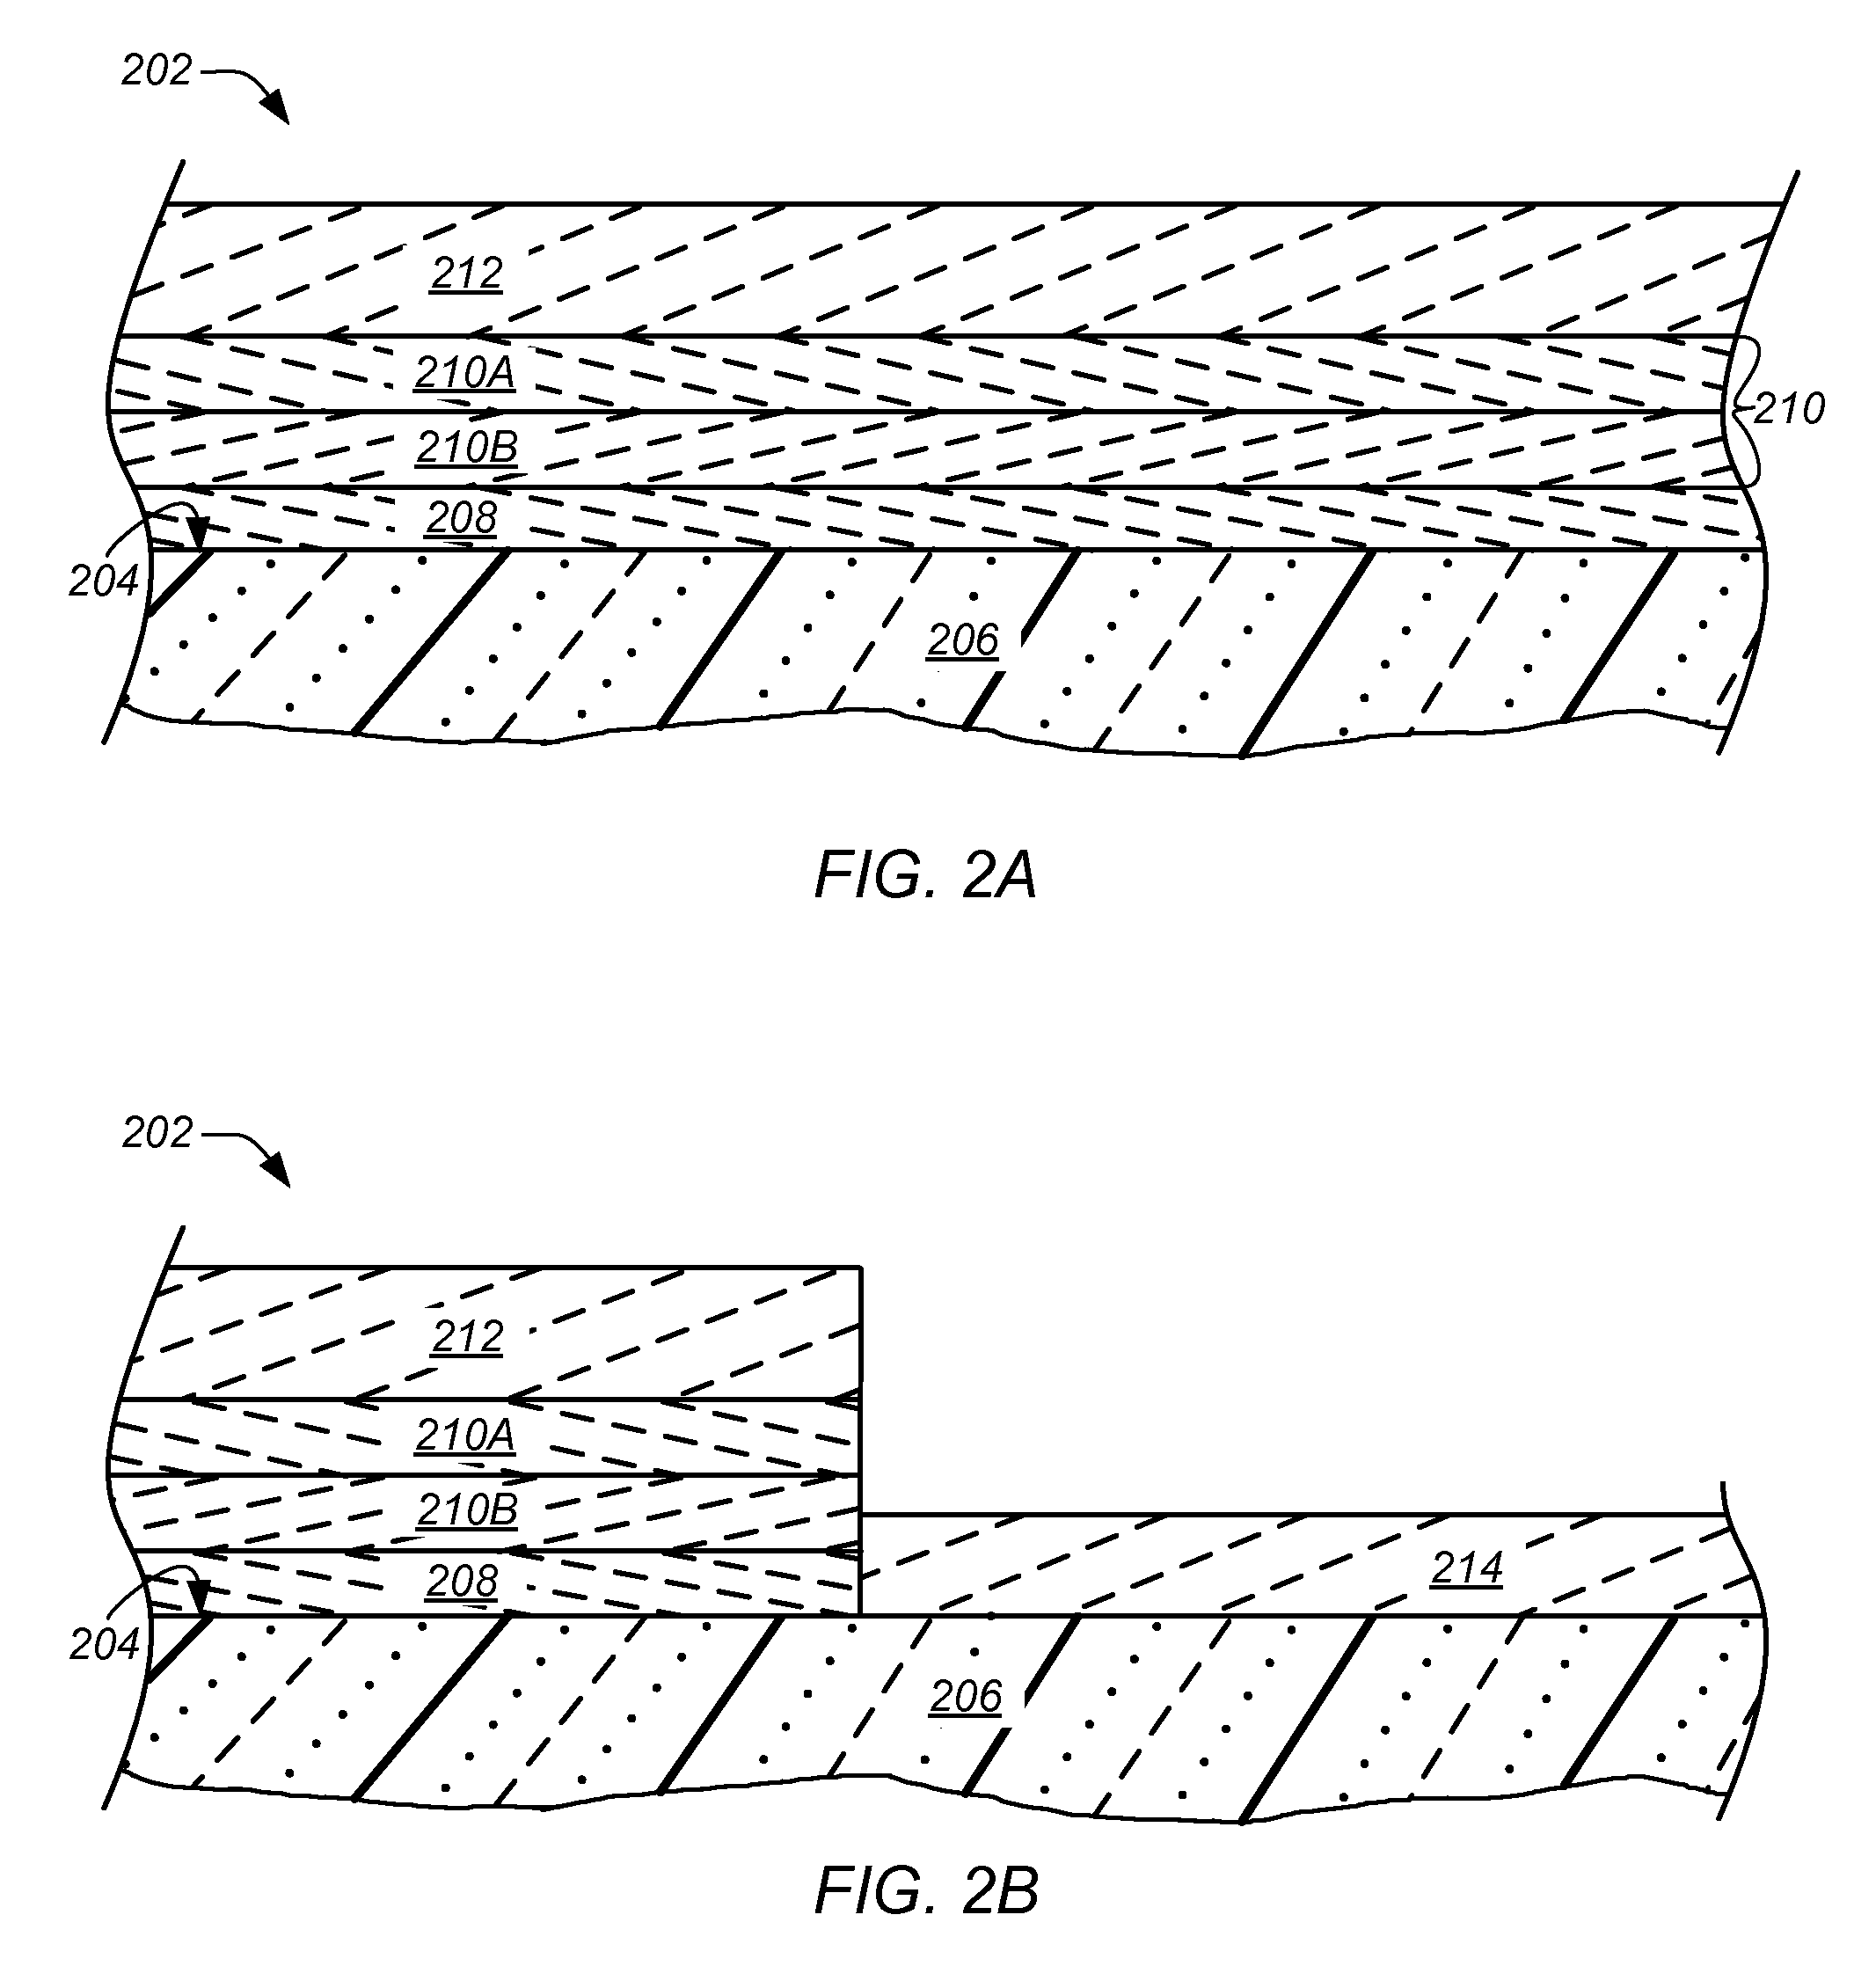 Memory transistor with multiple charge storing layers and a high work function gate electrode